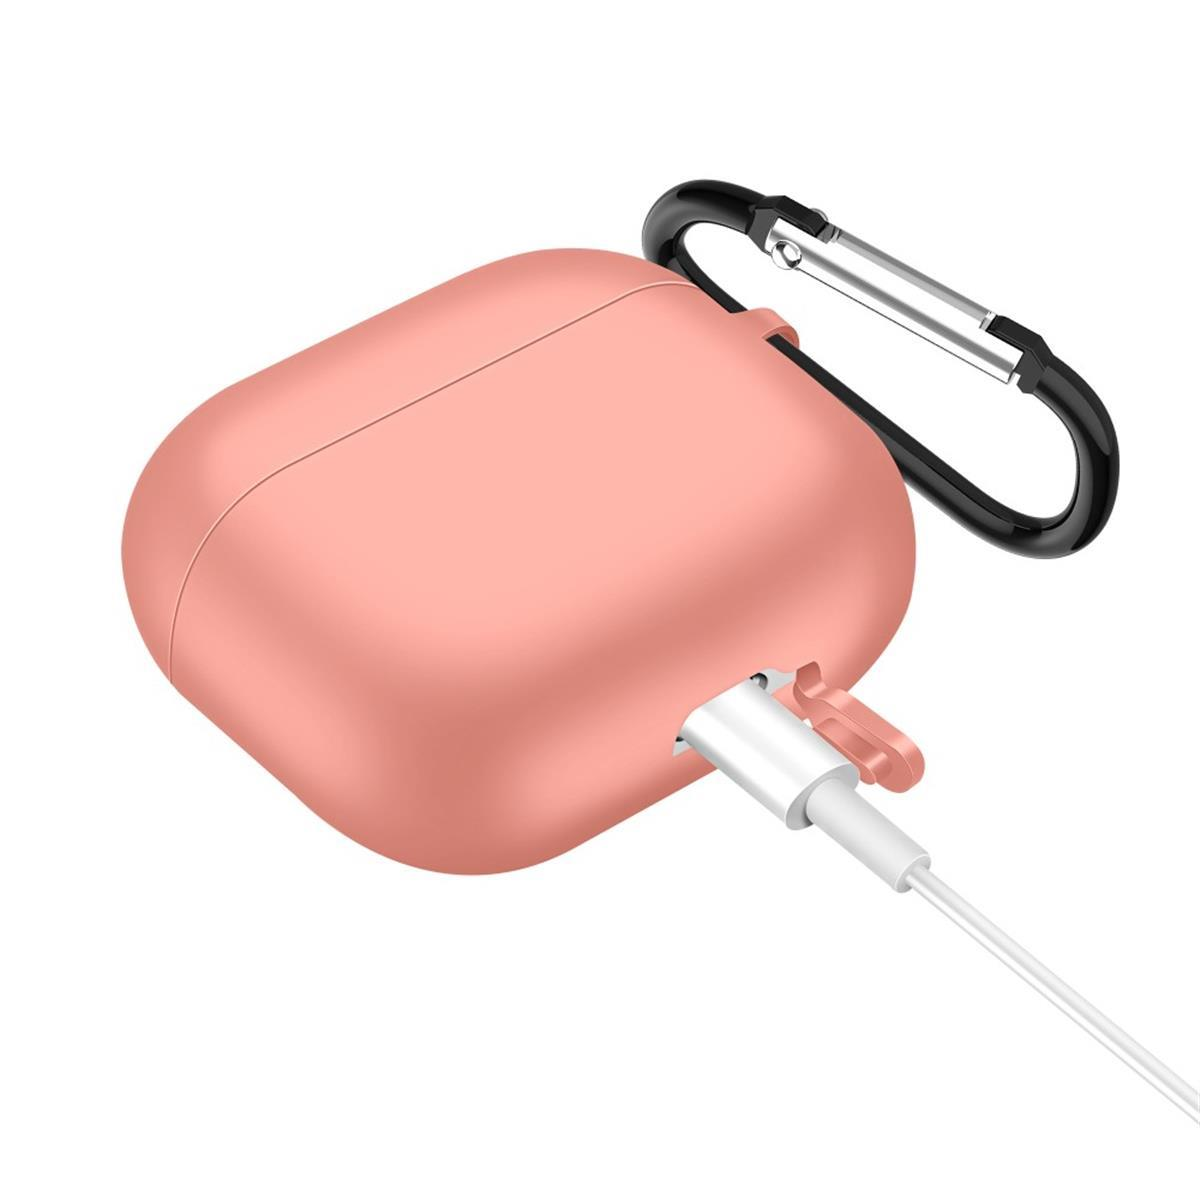 für Orange, COVERKINGZ AirPods Ladecase Apple 3 Silikoncover 76803 Unisex,